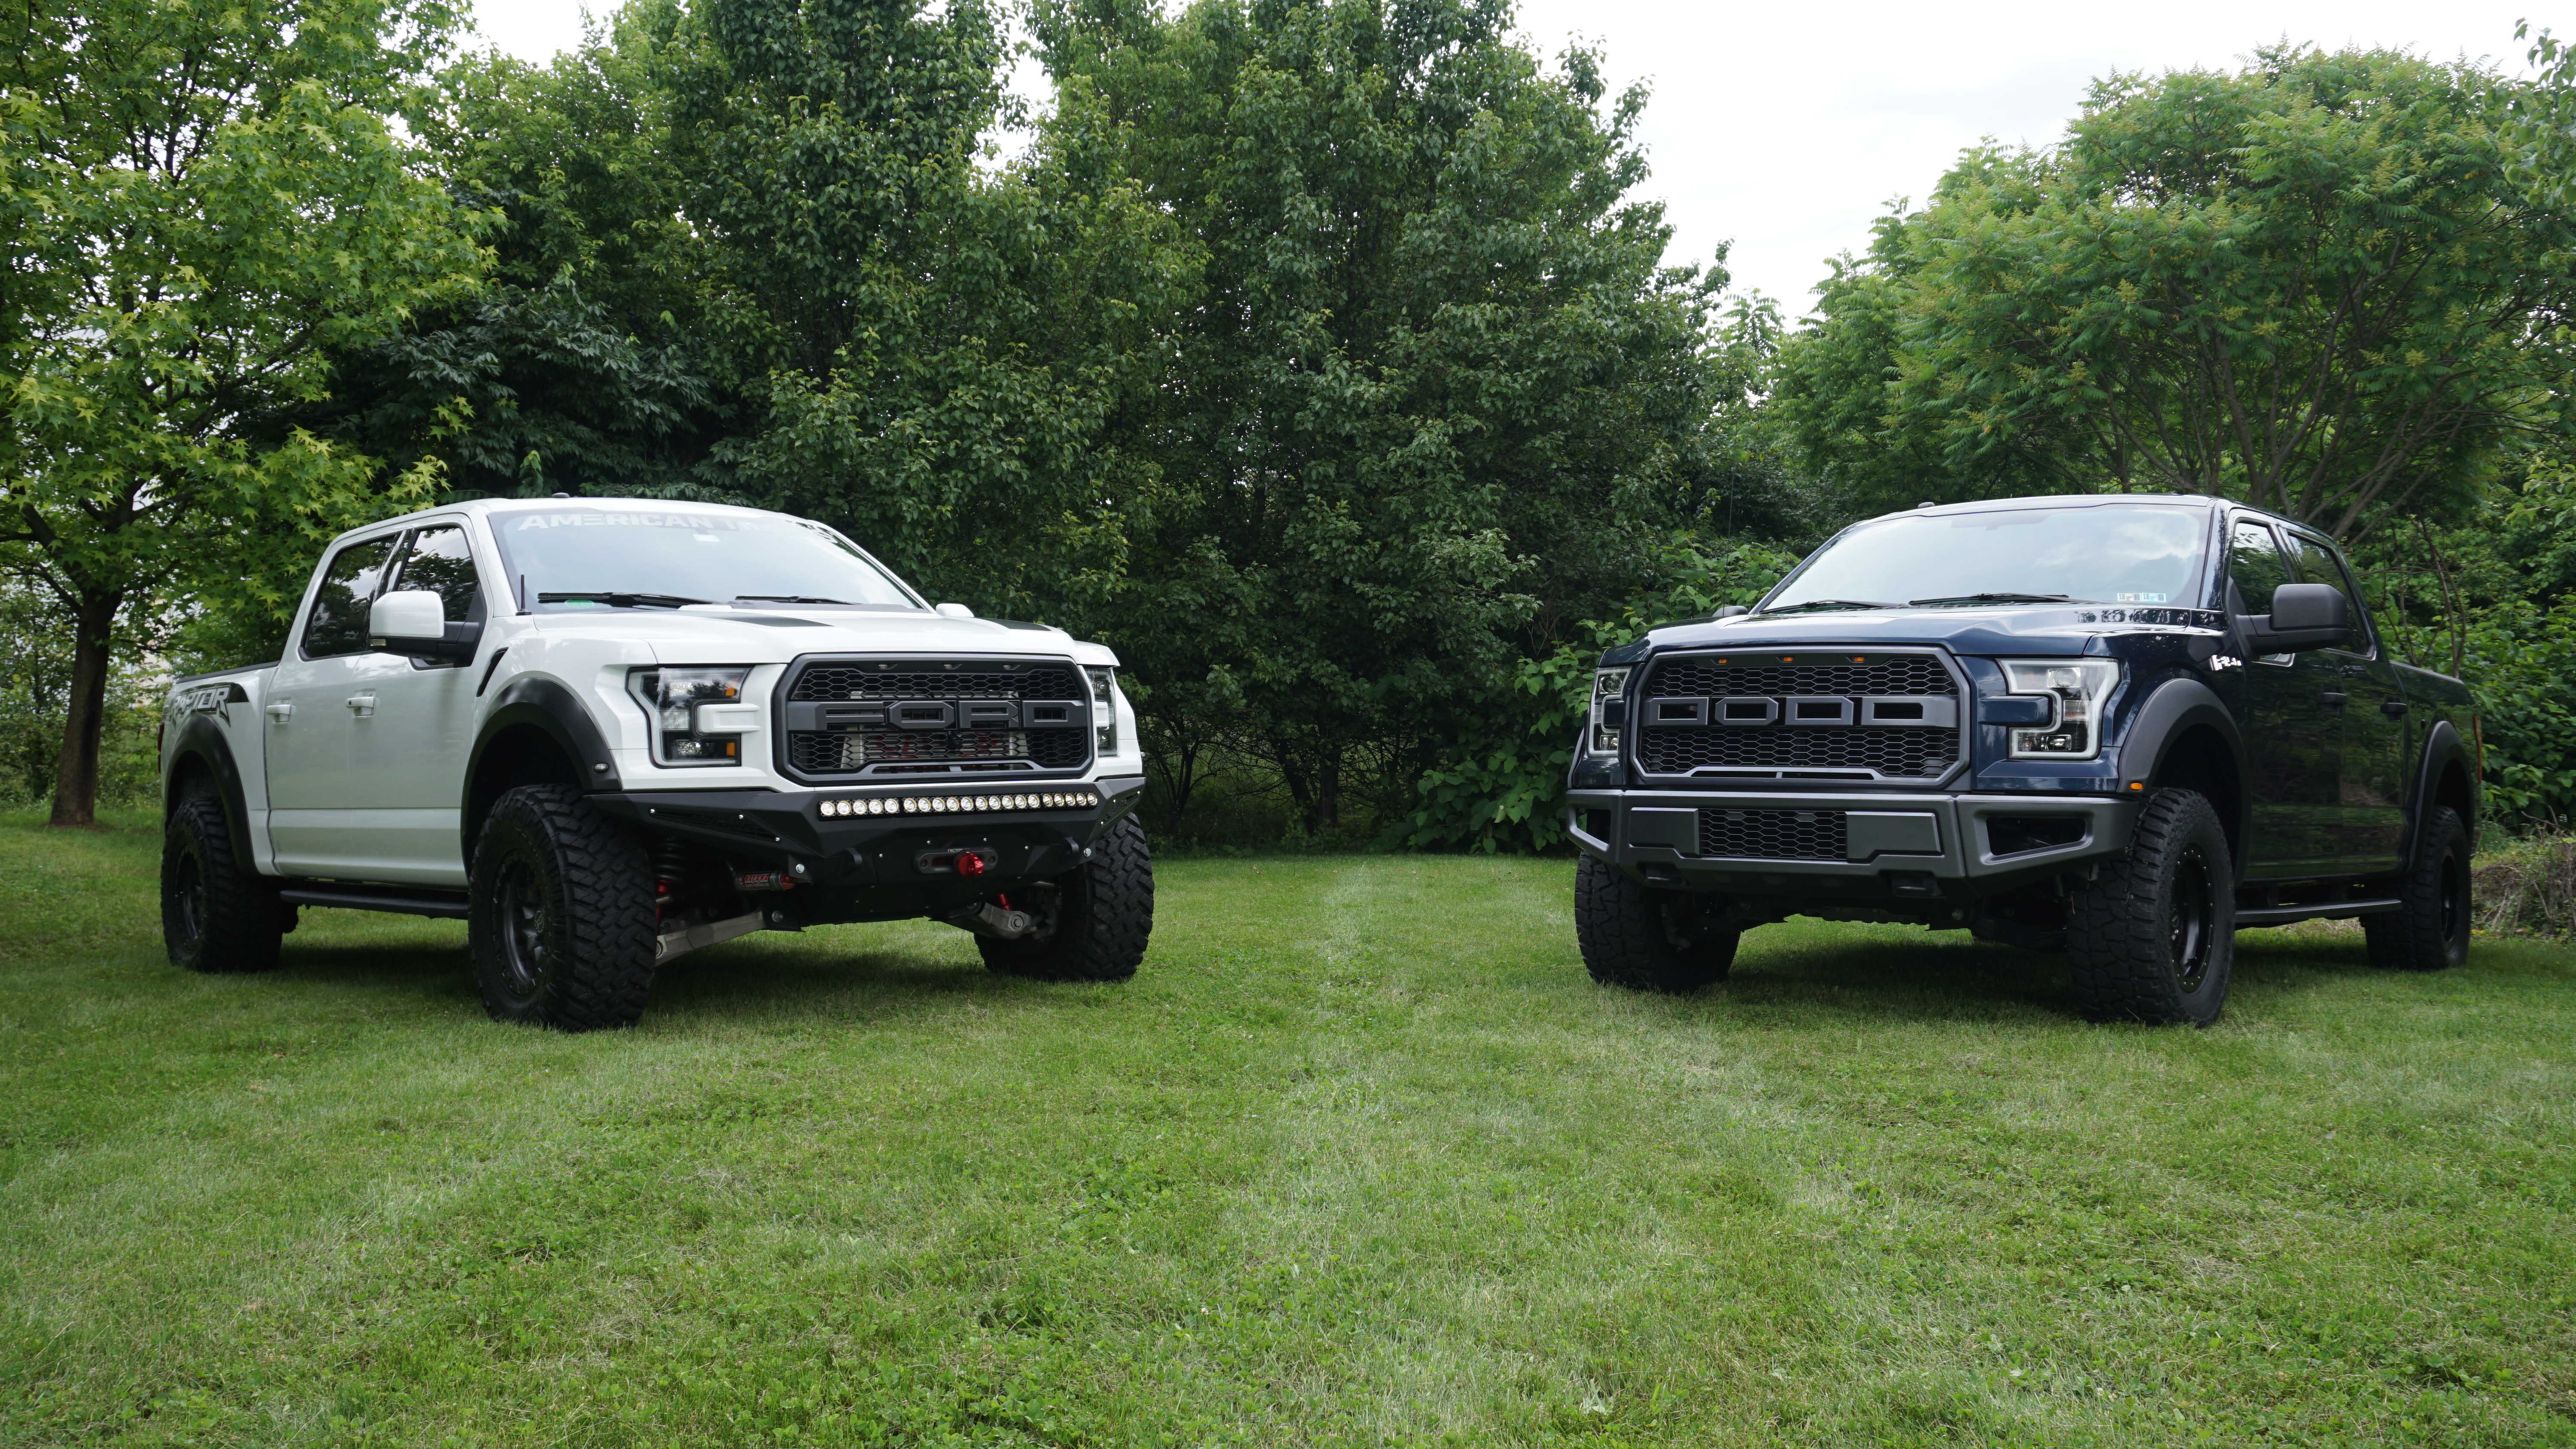 How To Make Your F150 Look Like A Ford Raptor & The Parts You Need To Do It